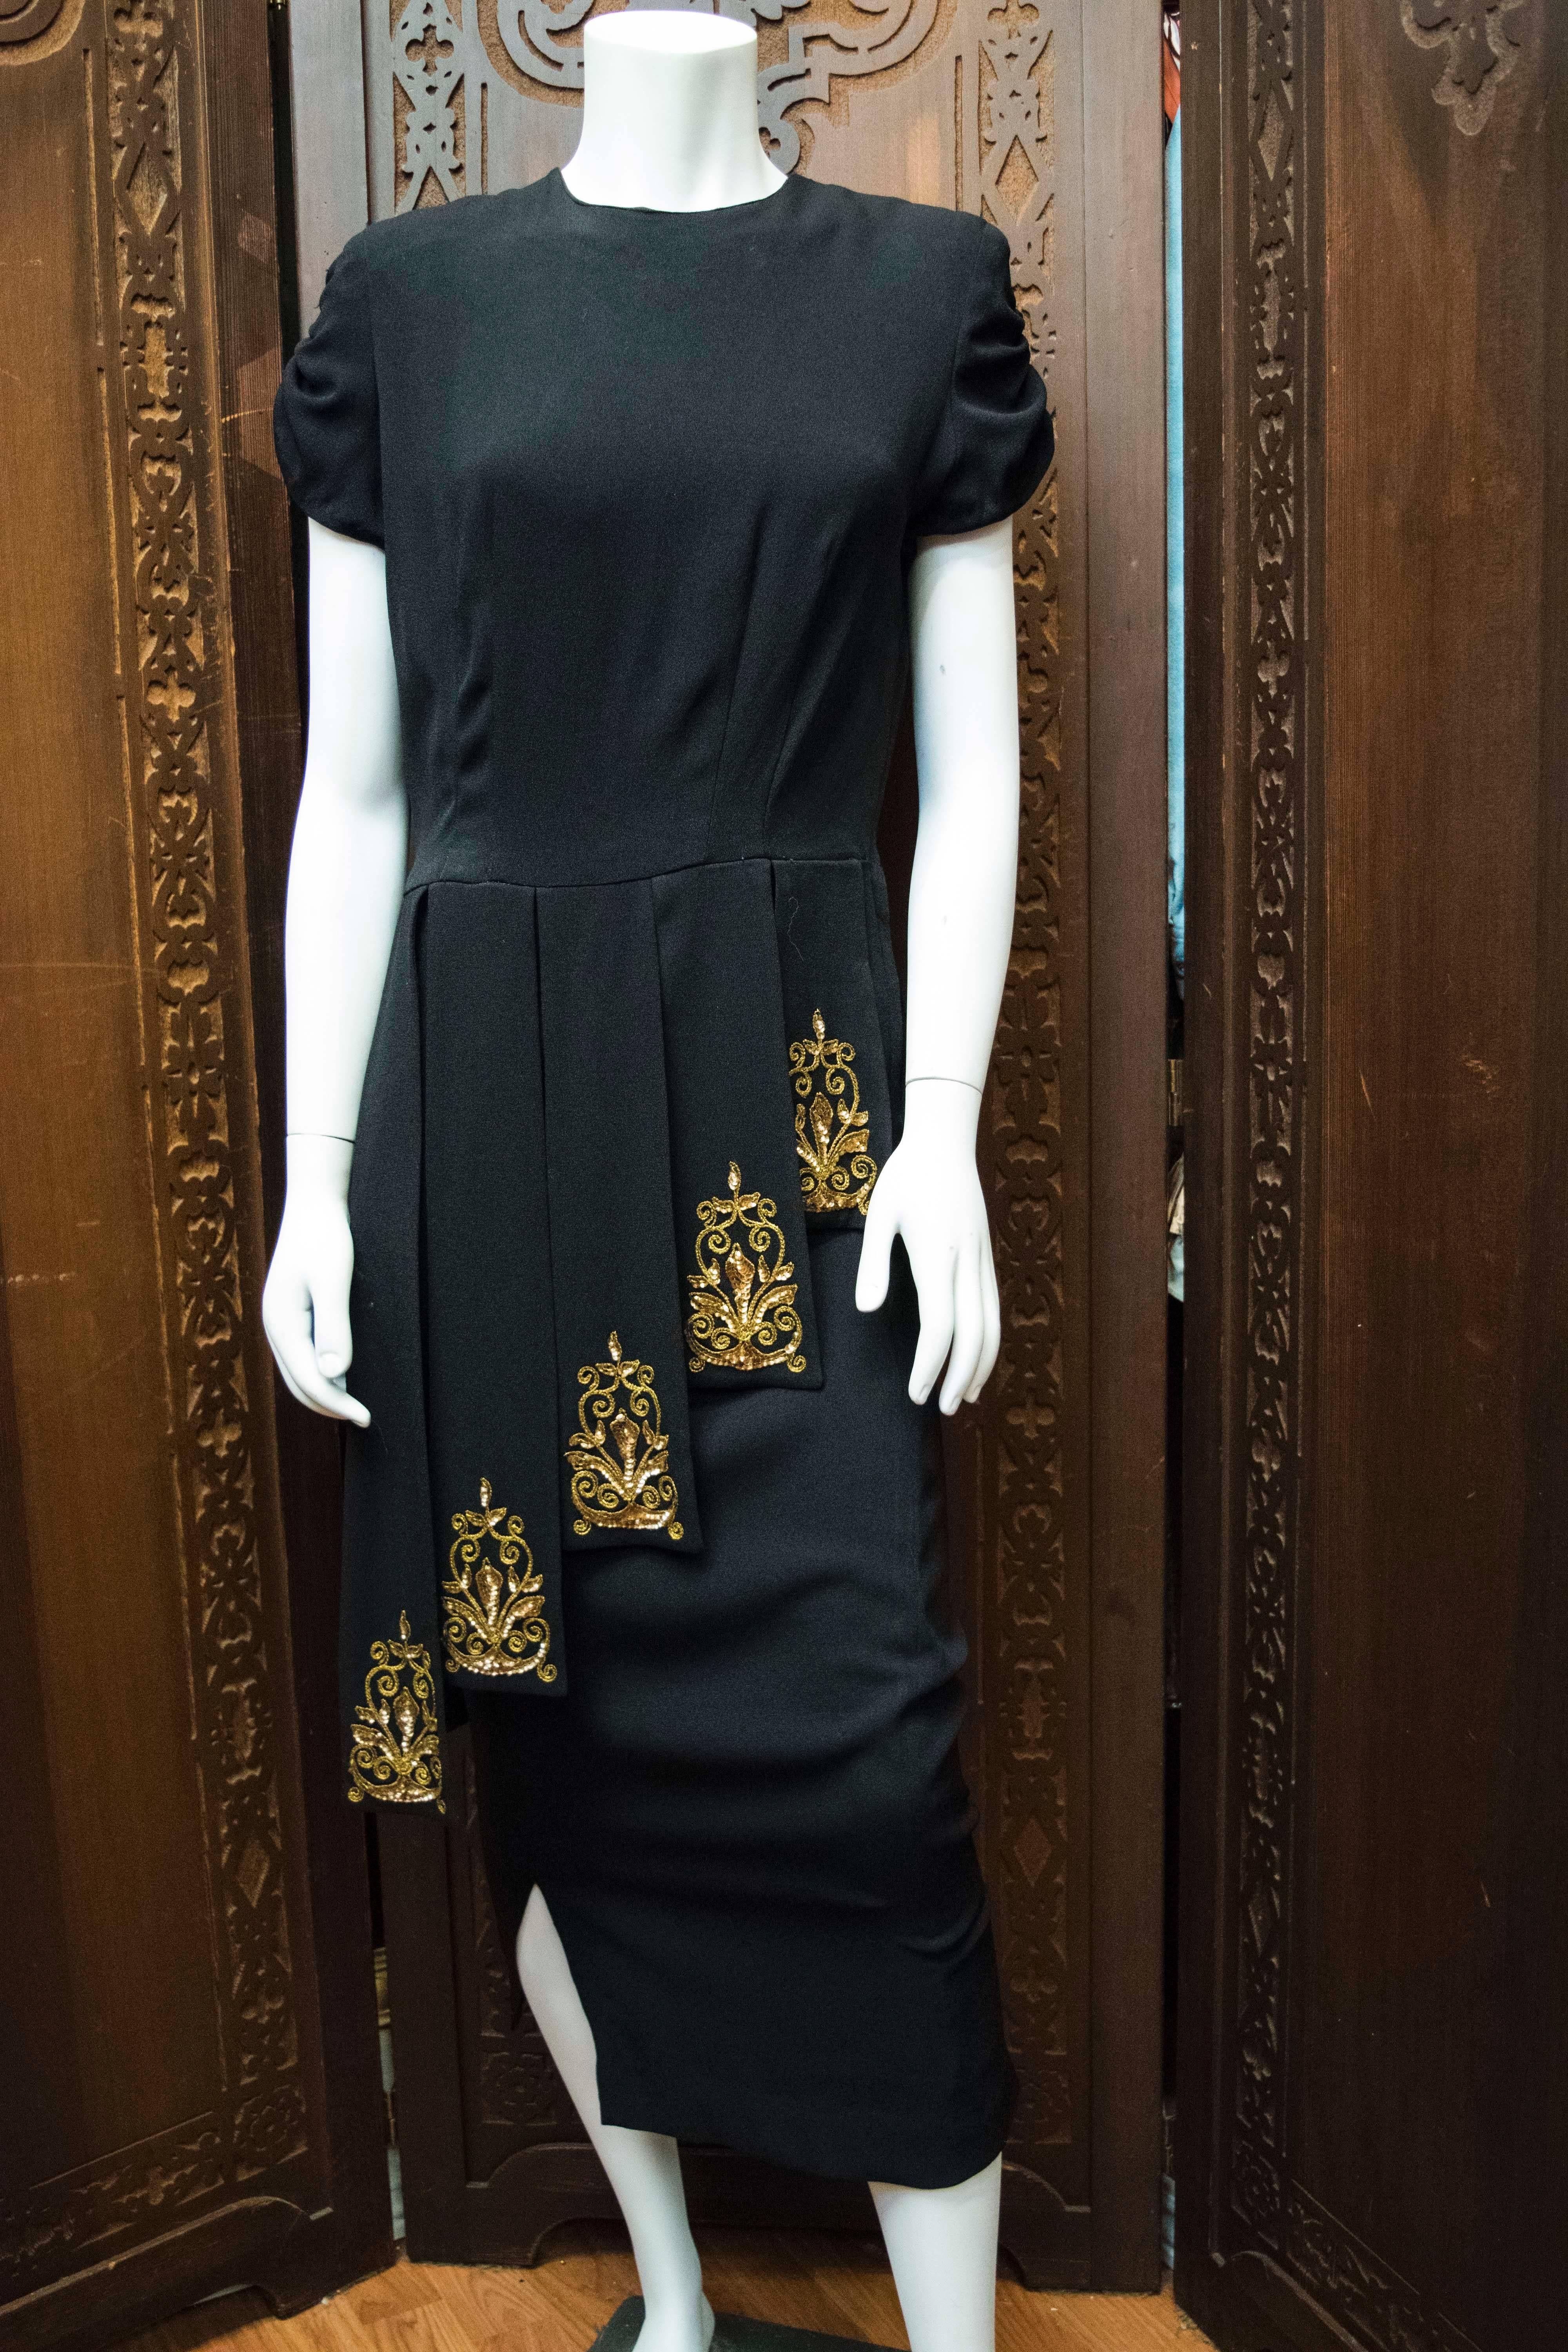 1940s Film Noir Cocktail Dress. Designed by Eisenberg and Sons who are also famous fo their jewelry.

Stunning 1940s dress with graduated gladiator panelling with gold lamé thread embroidery. 

B 36
W 30
H 38
L 50